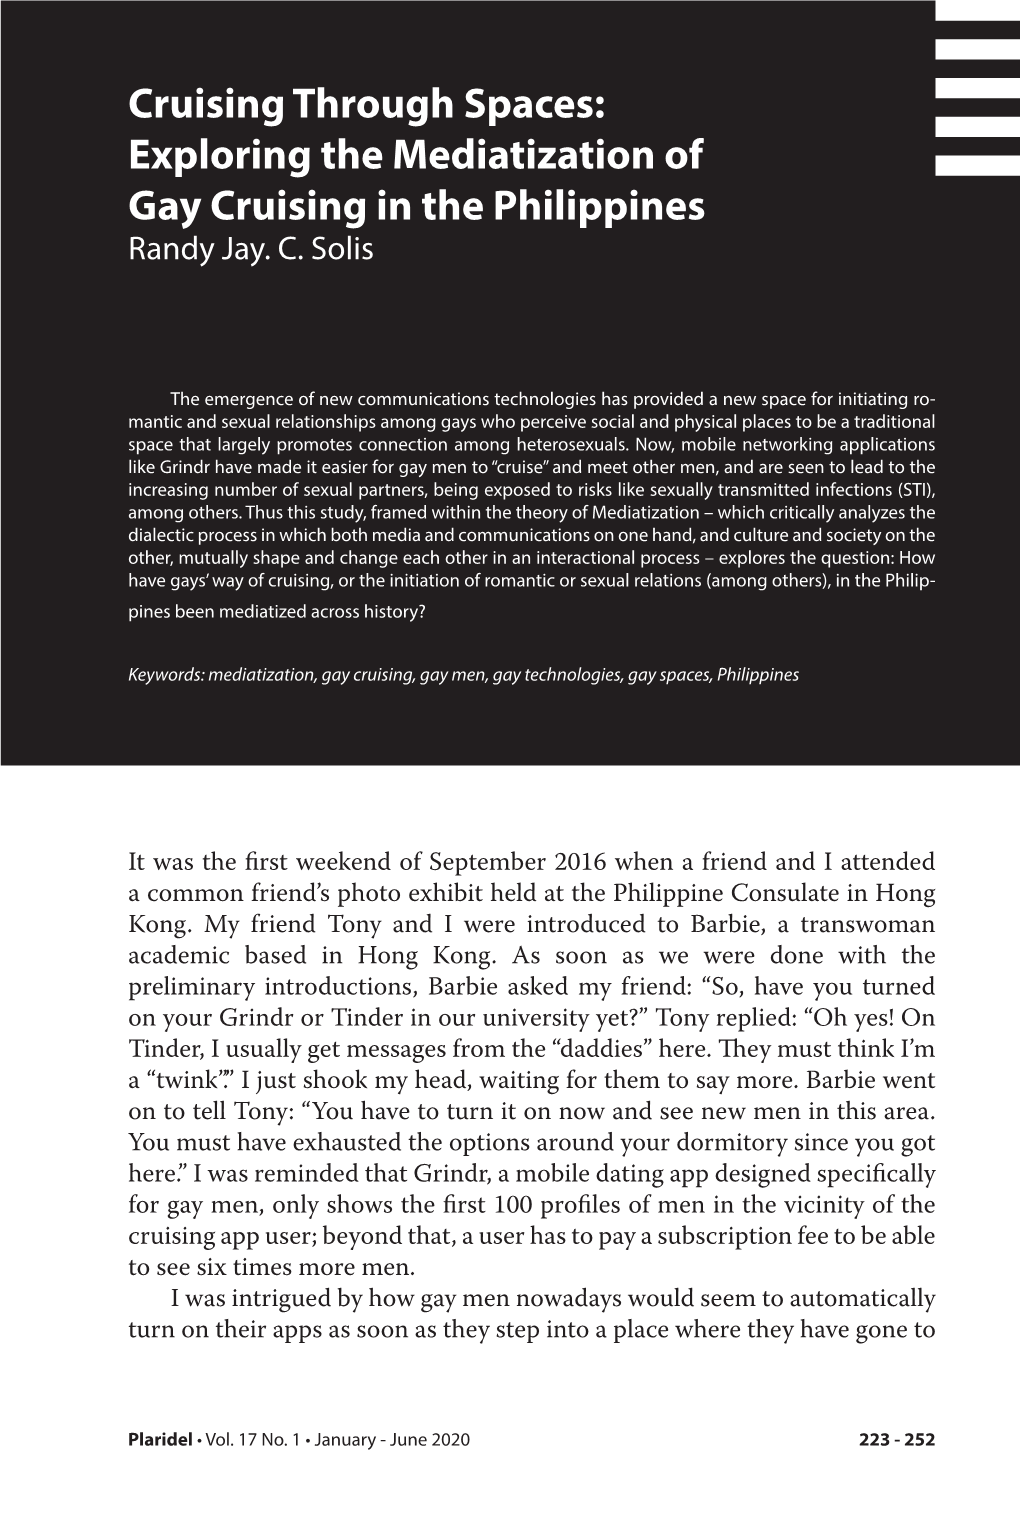 Exploring the Mediatization of Gay Cruising in the Philippines Randy Jay